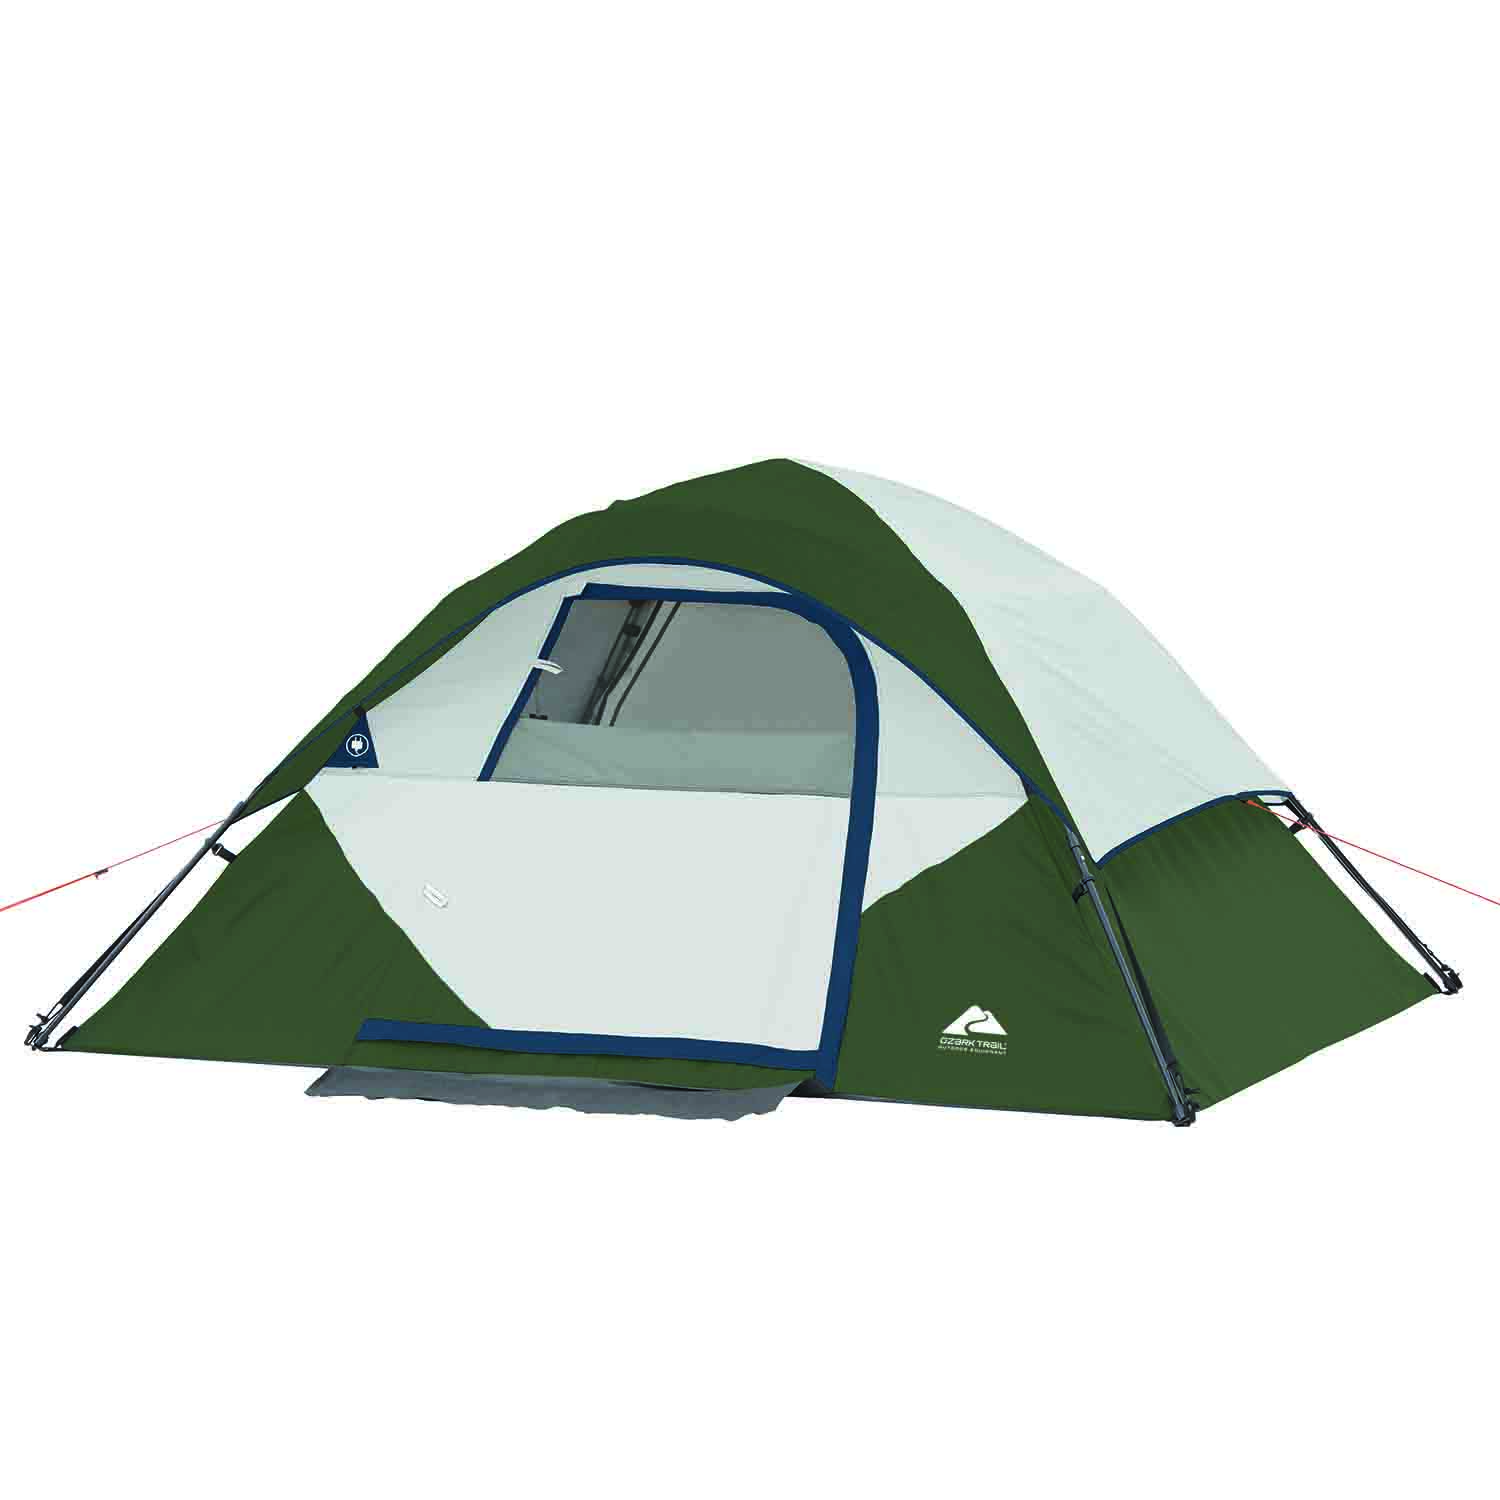 Ozark Trail 6-Piece, 4 Person Camping Combo, Tent - image 8 of 8